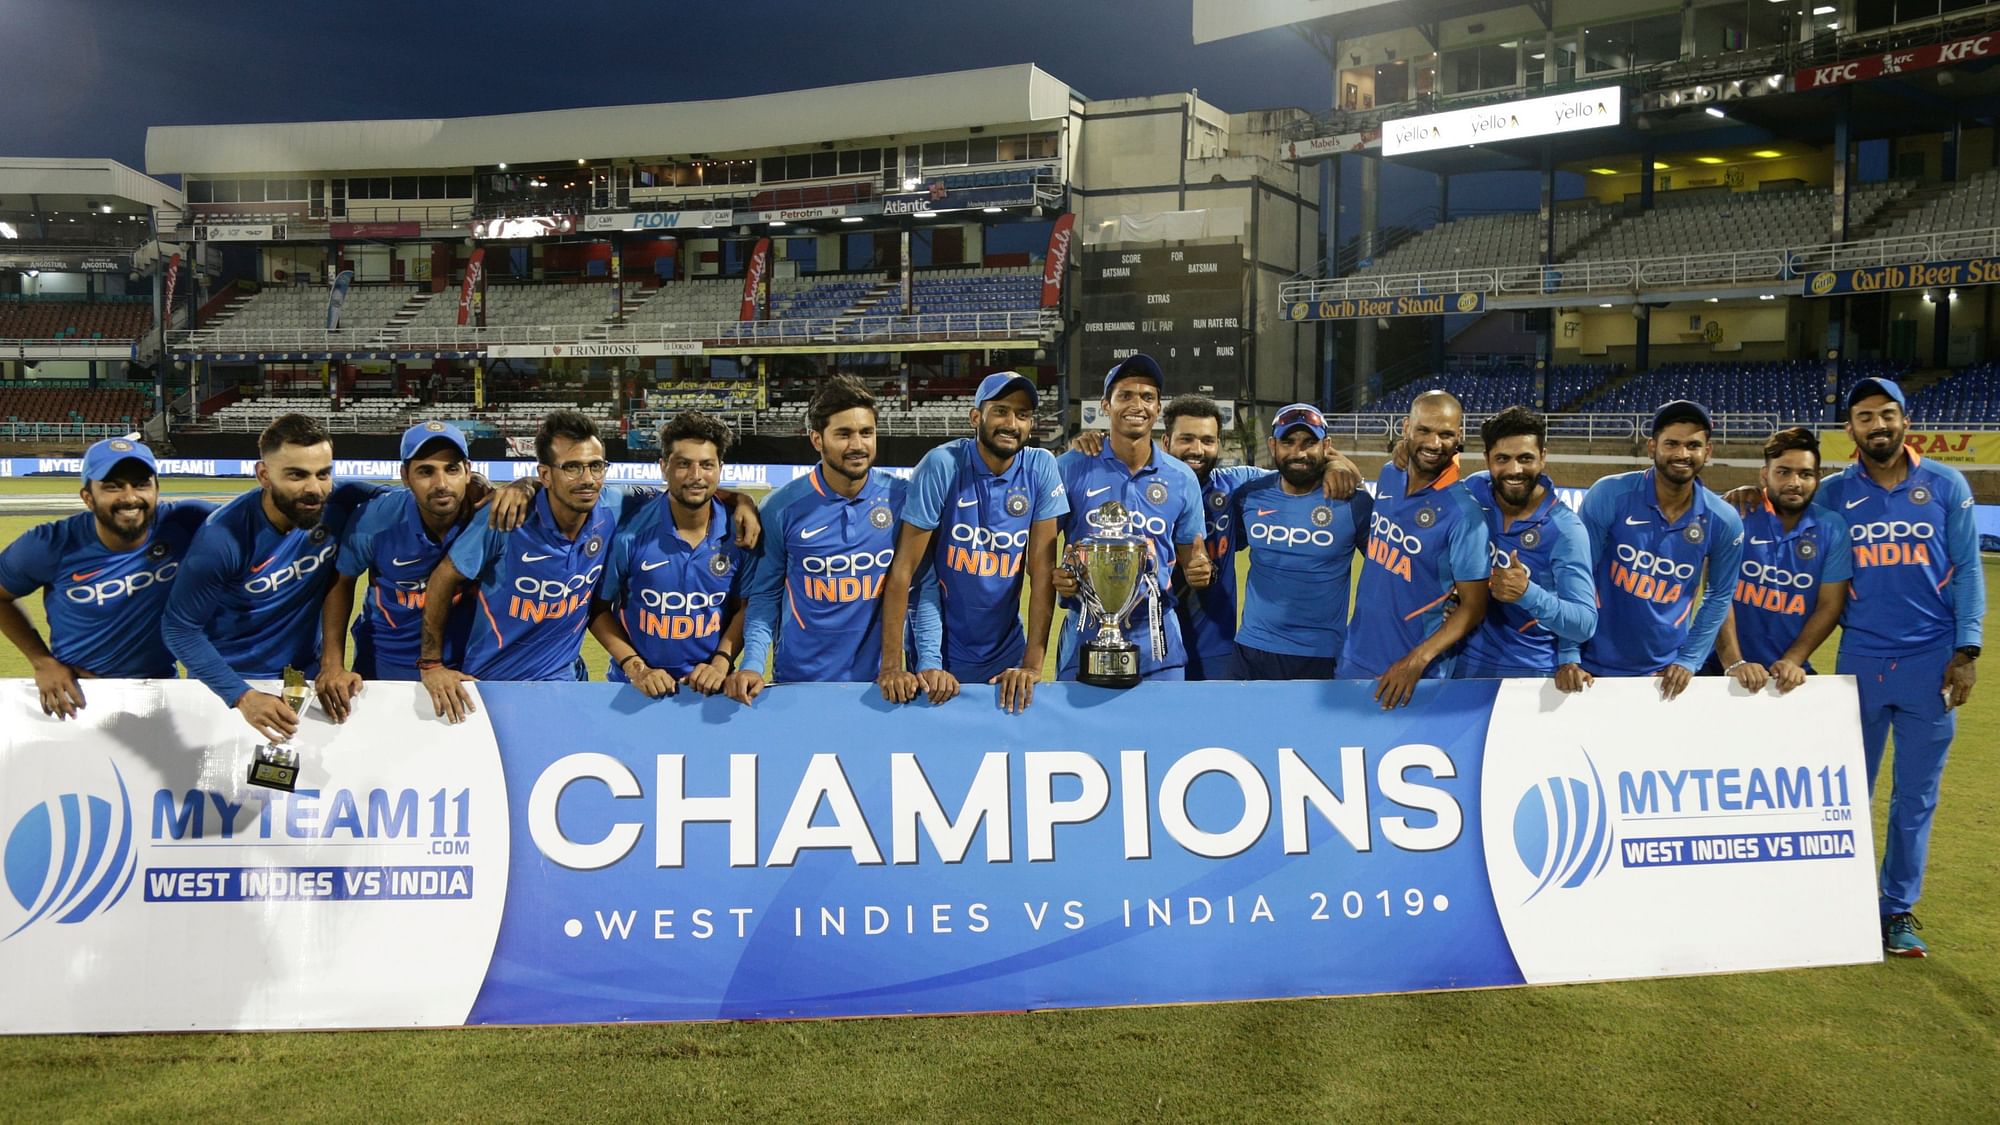 The Indian team pose for a photo after winning the ODI series against West Indies in Port of Spain, Trinidad.